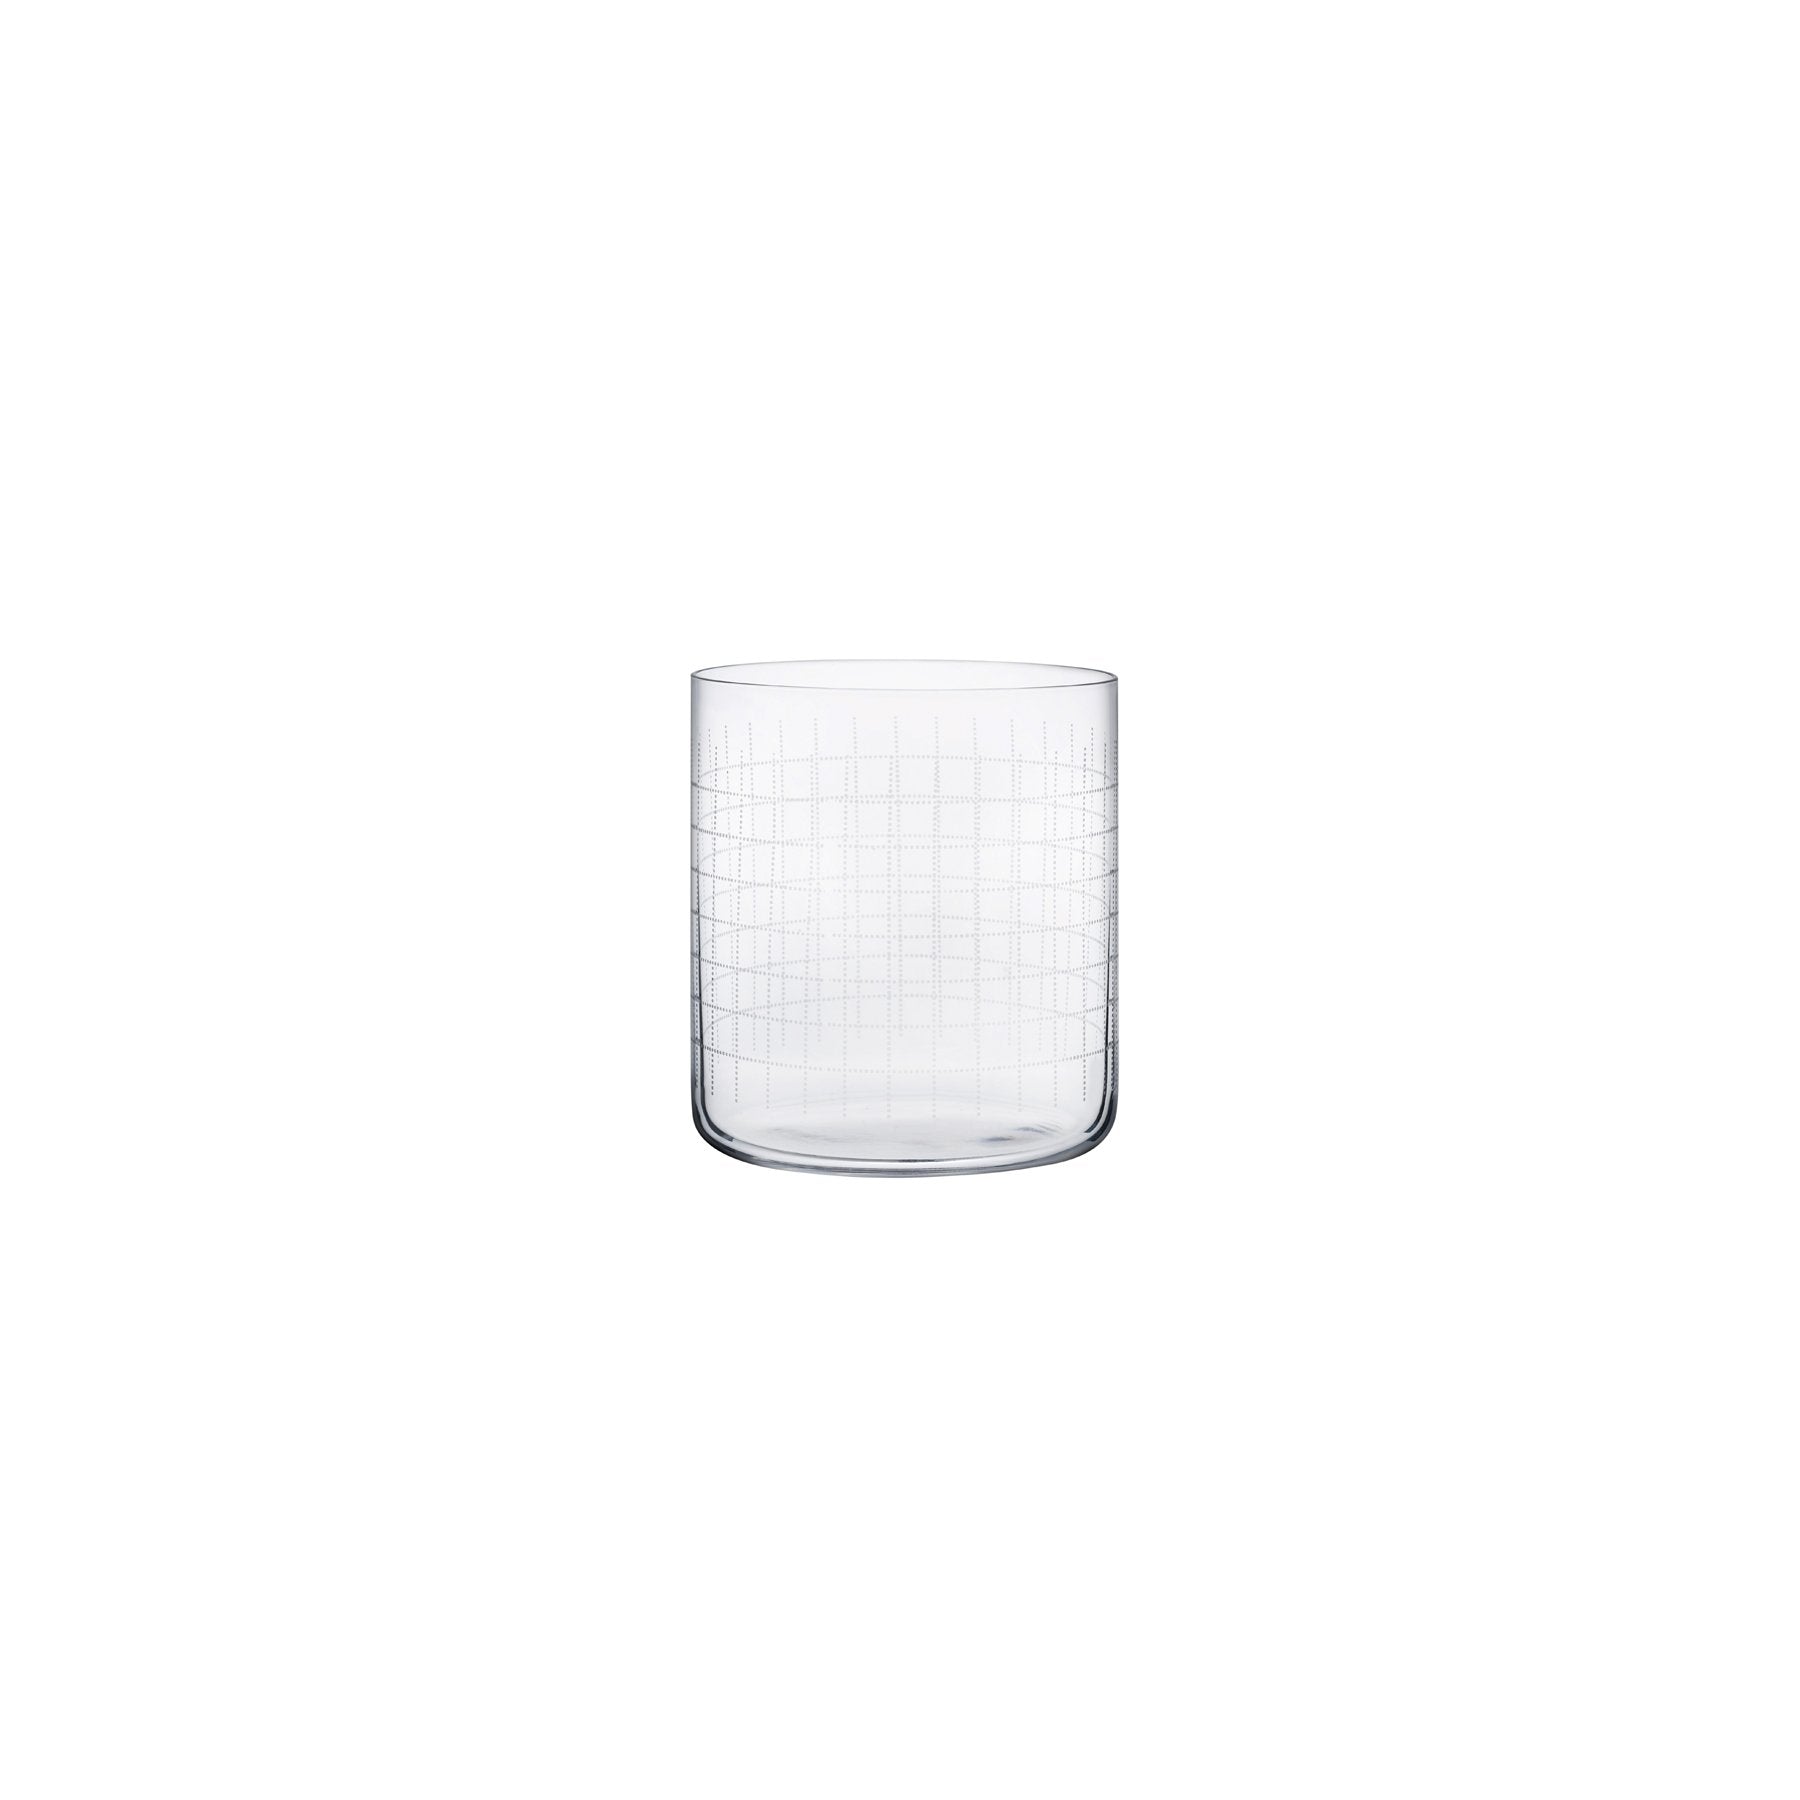 finesse grid set of 4 whisky SOF glasses by nude at adorn.house 